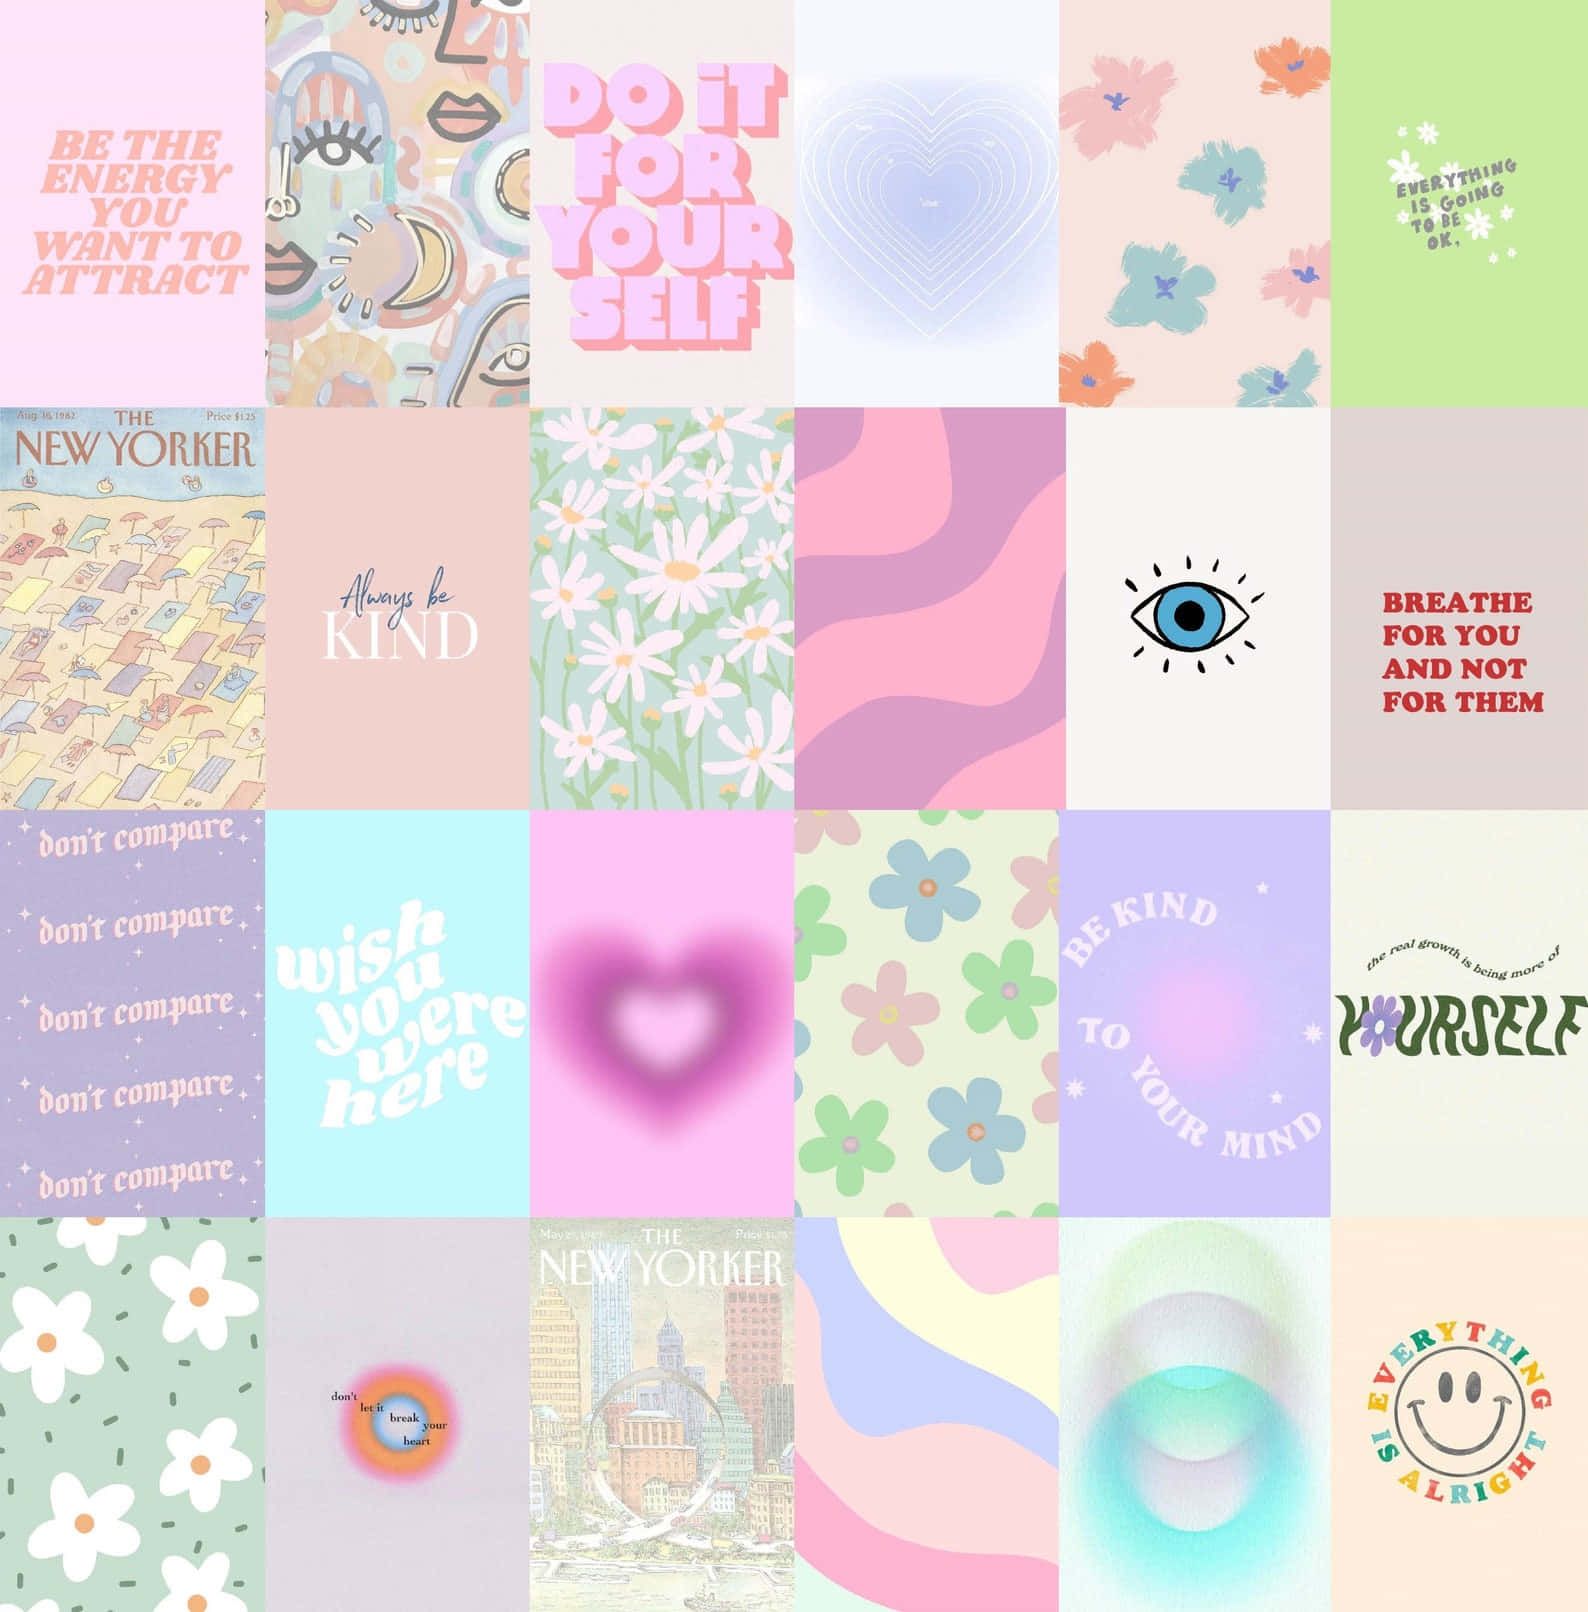 A collage of images with a pastel aesthetic - Danish